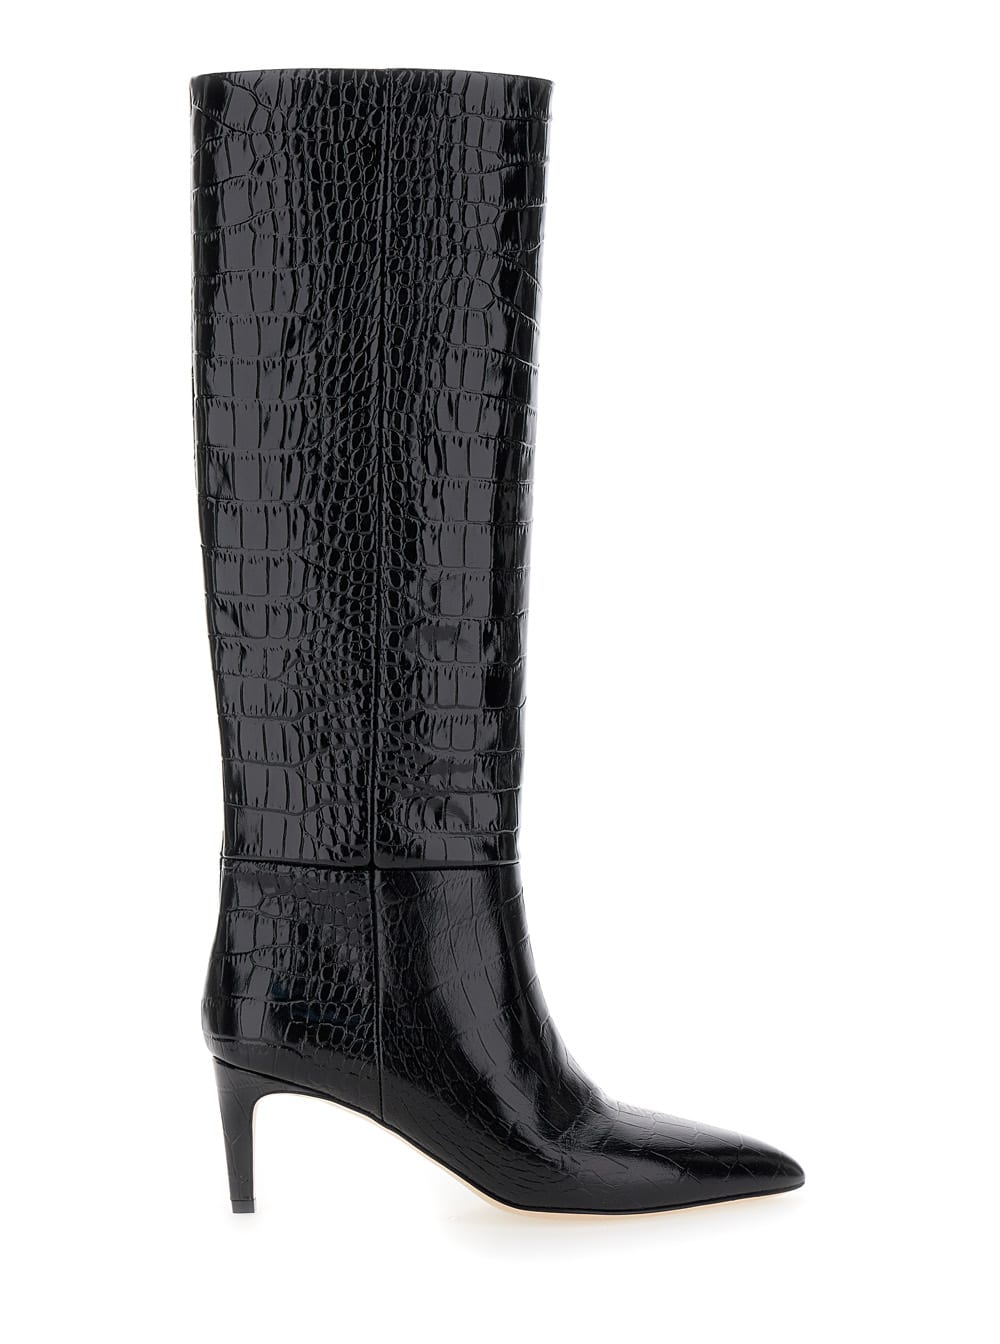 Black High Boots With Stiletto Heel In Croco Embossed Leather Woman